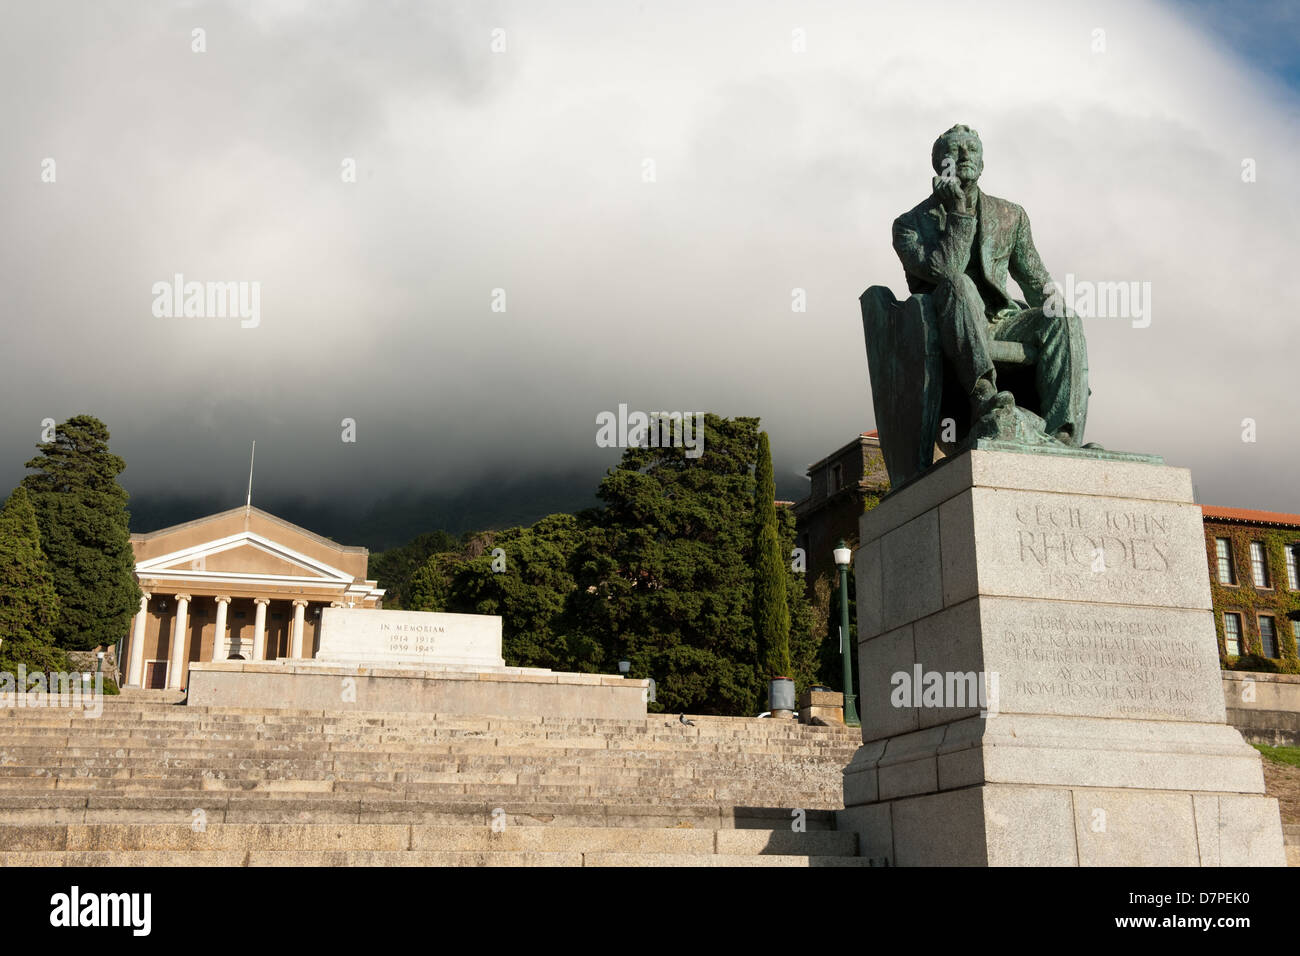 Statue of CJ Rhodes at UCT, University of Cape Town, South Africa Stock Photo